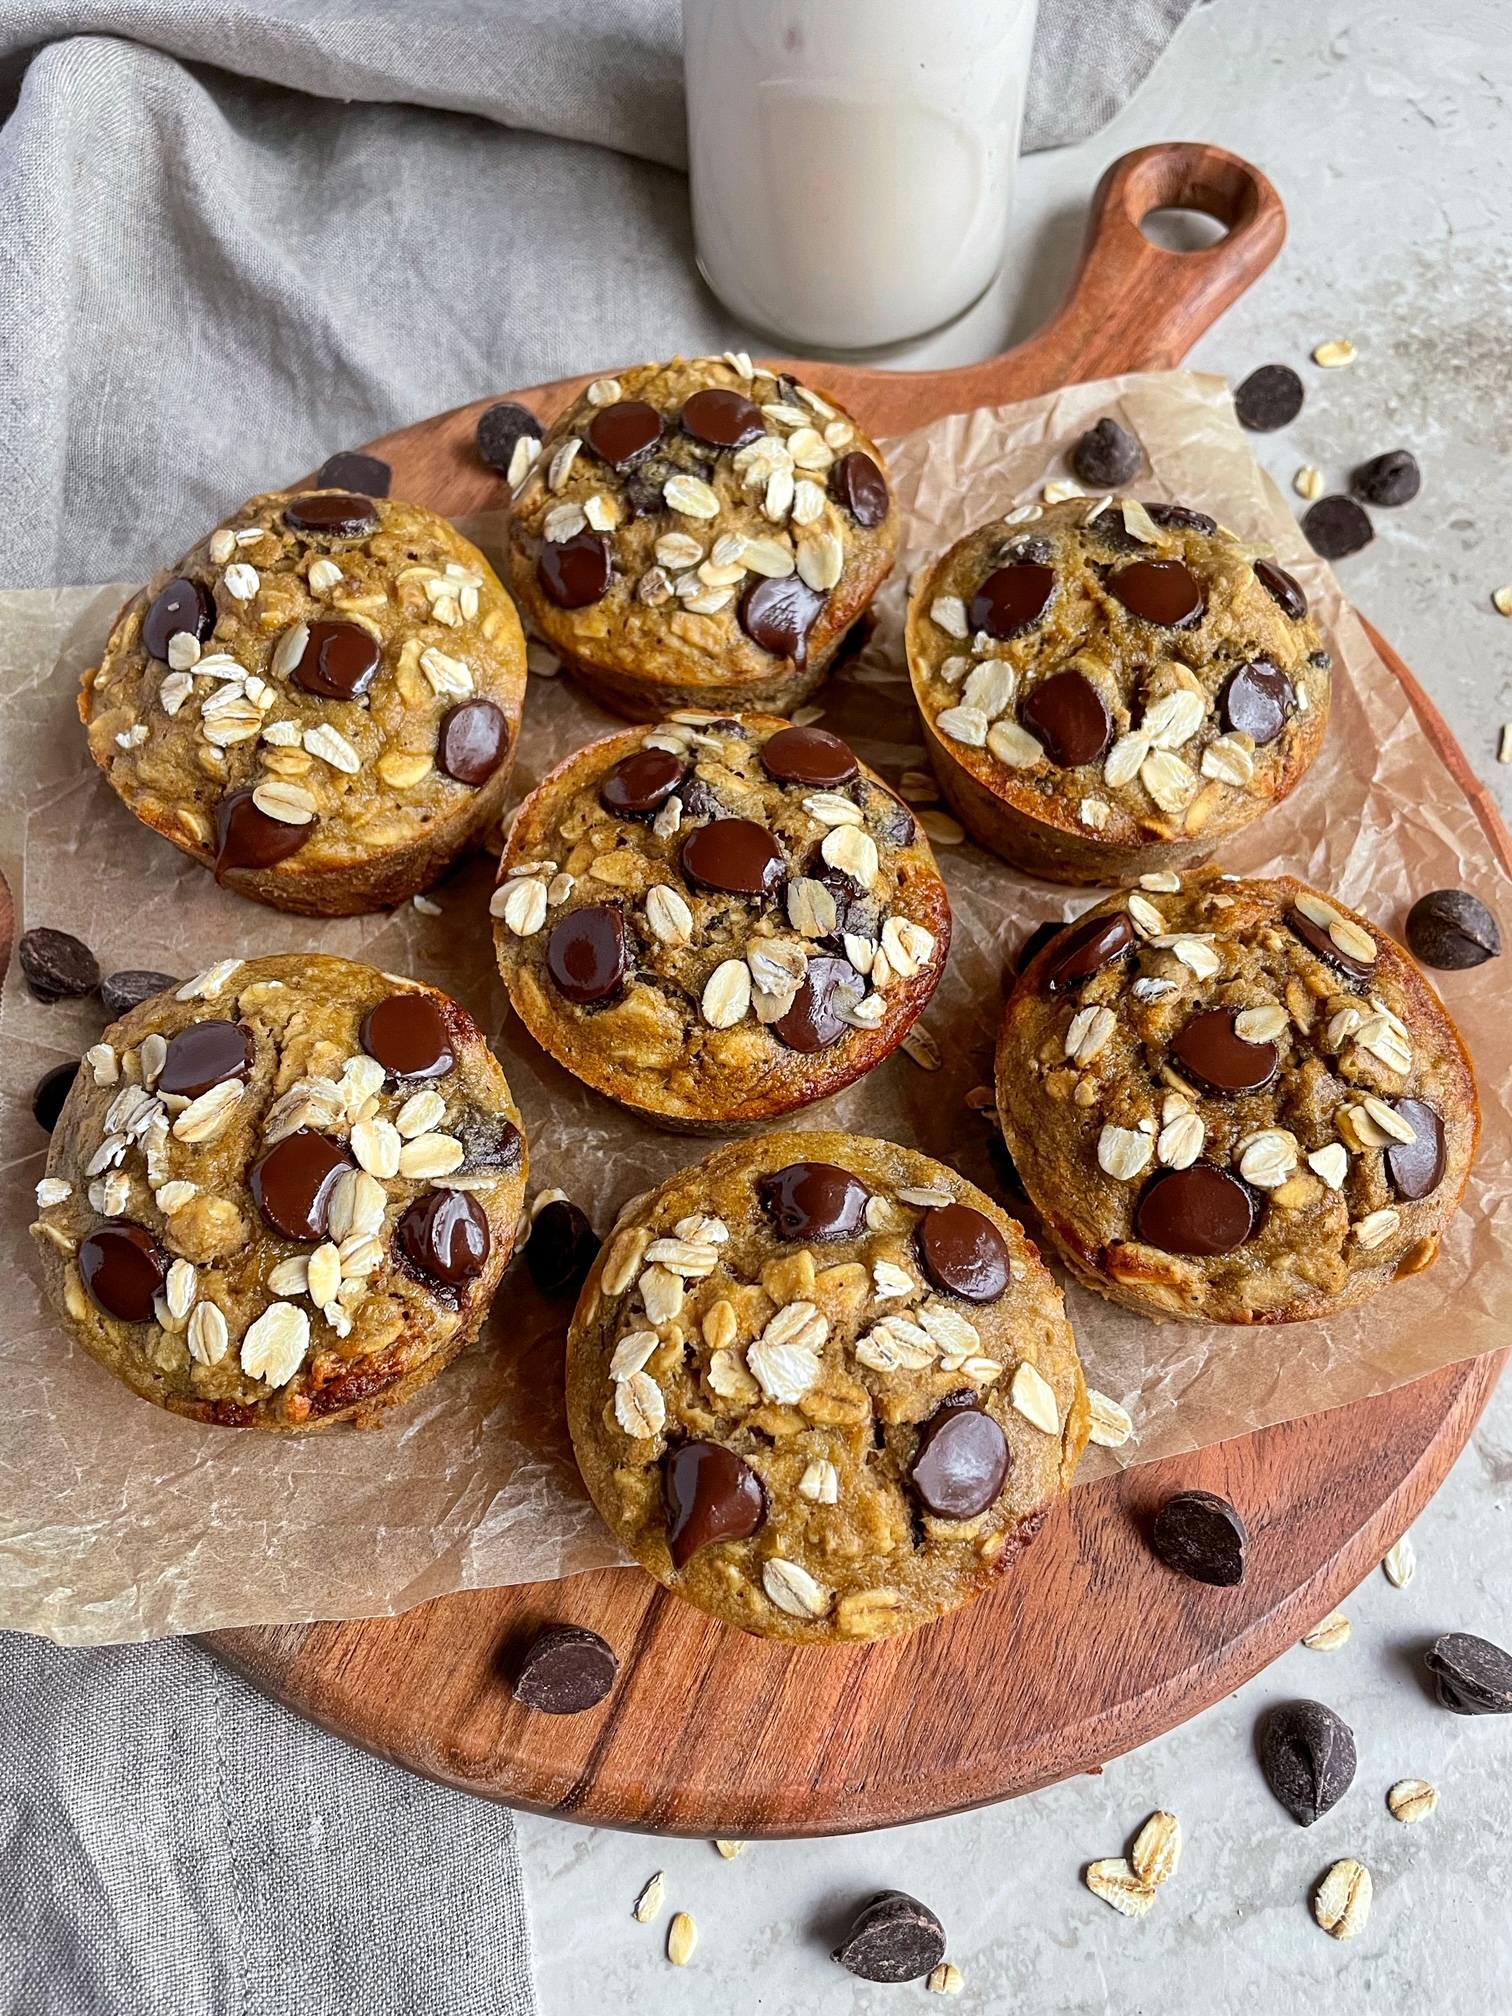 oat flour banana chocolate chip muffins on a wooden board